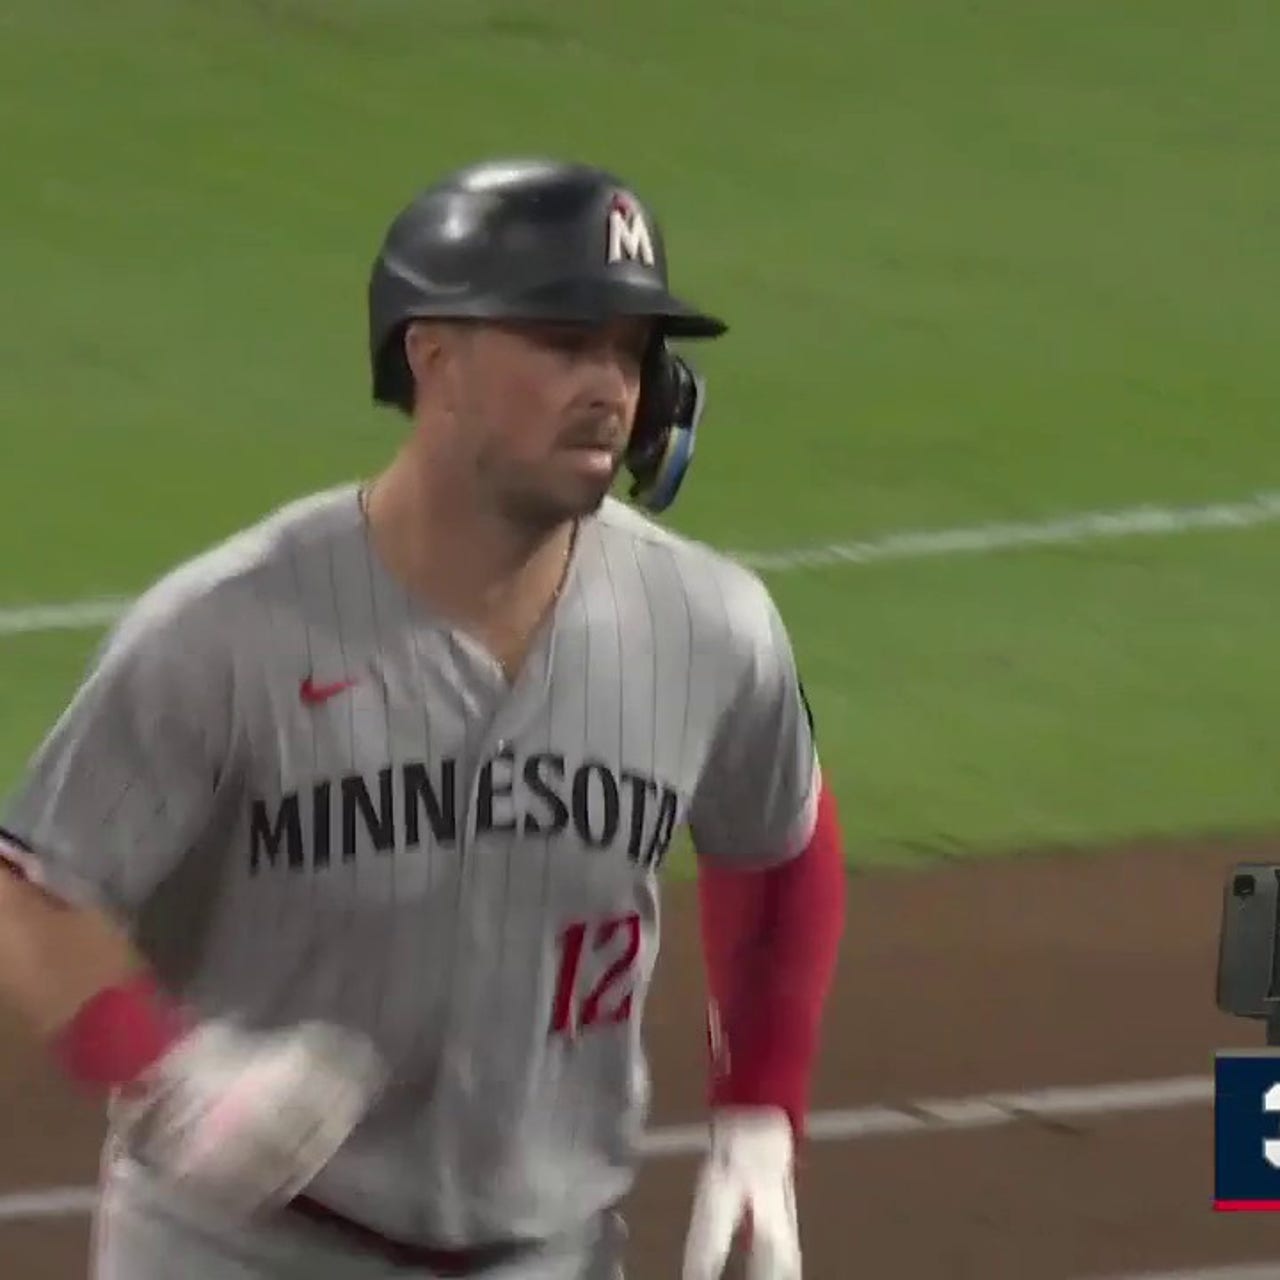 Kyle Farmer smashes a two-run homer, extending the Twins' lead